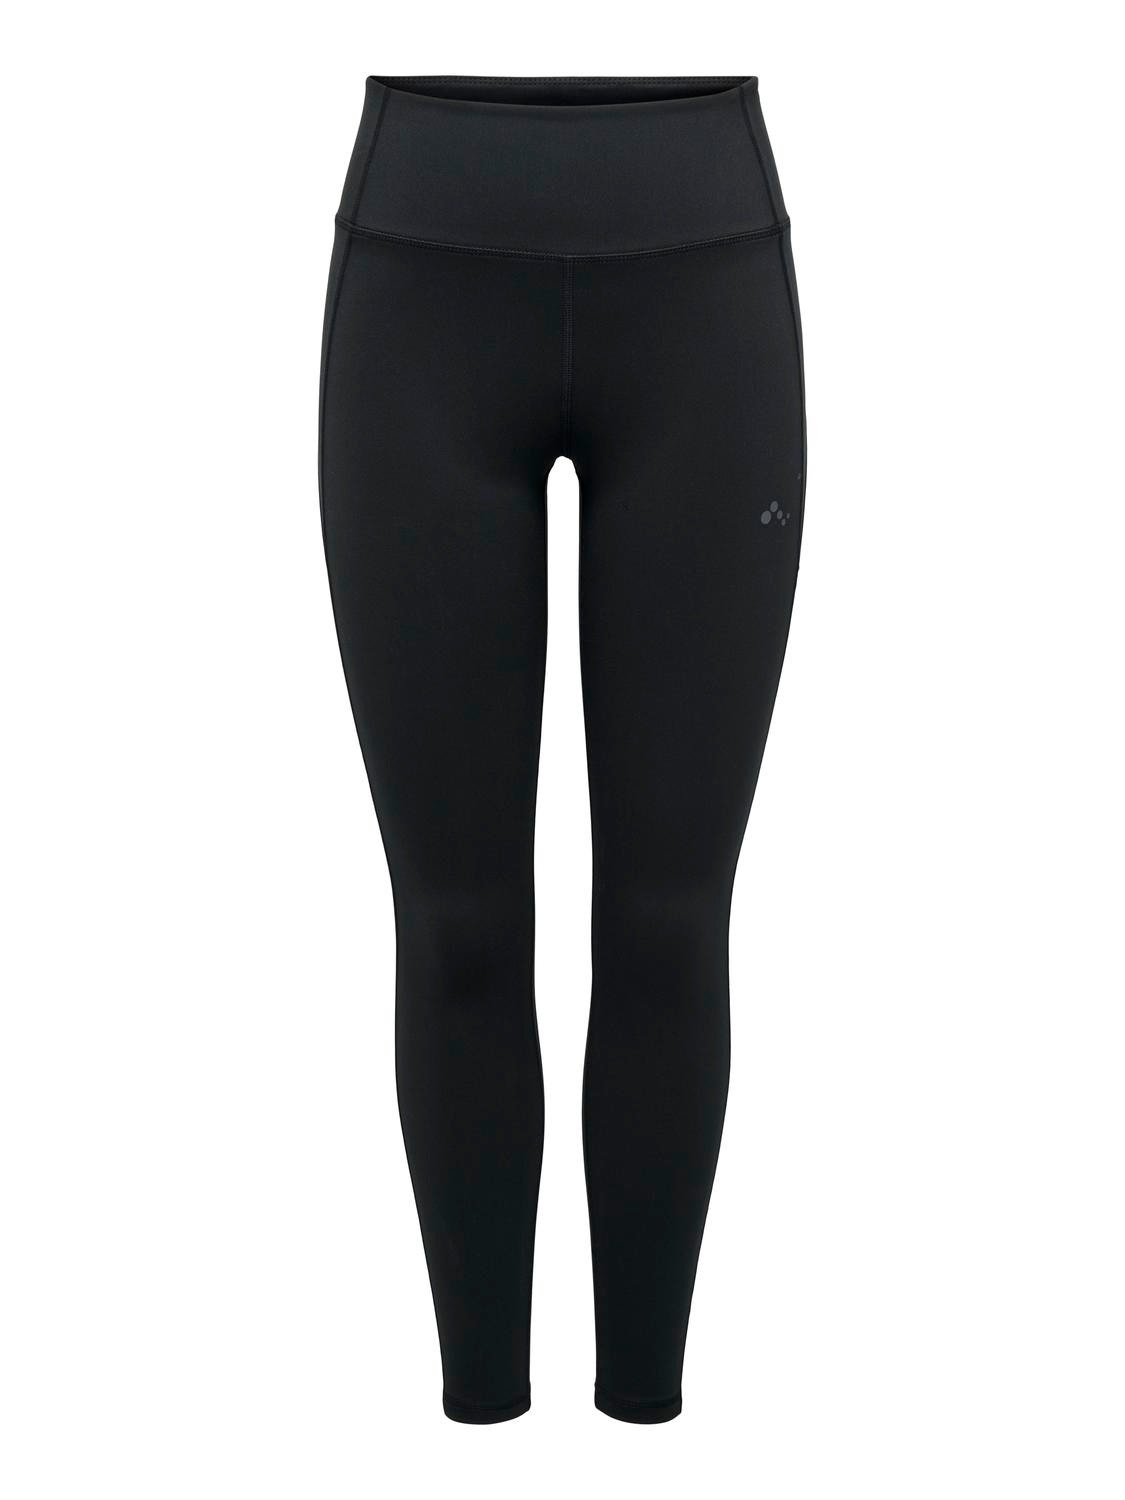 ONLY Tight Fit High waist Leggings -Black - 15288981